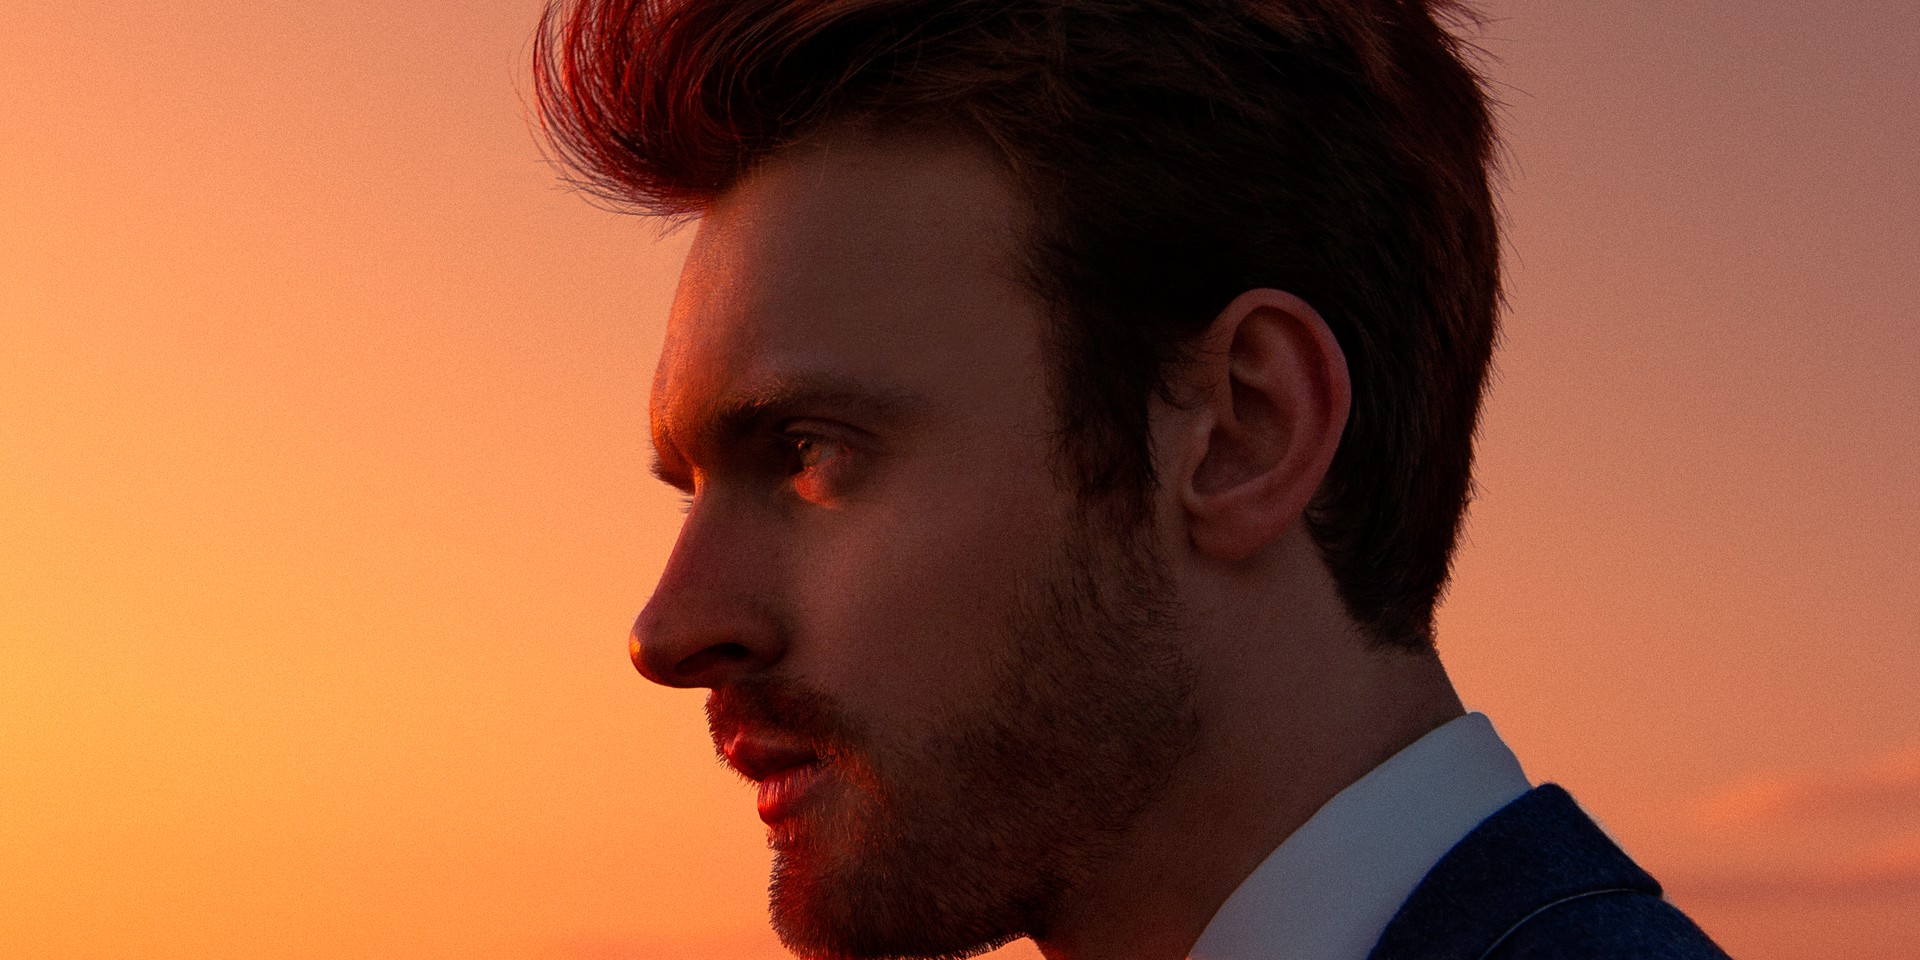 FINNEAS talks about his creative process, living with synesthesia, and life after winning a GRAMMY